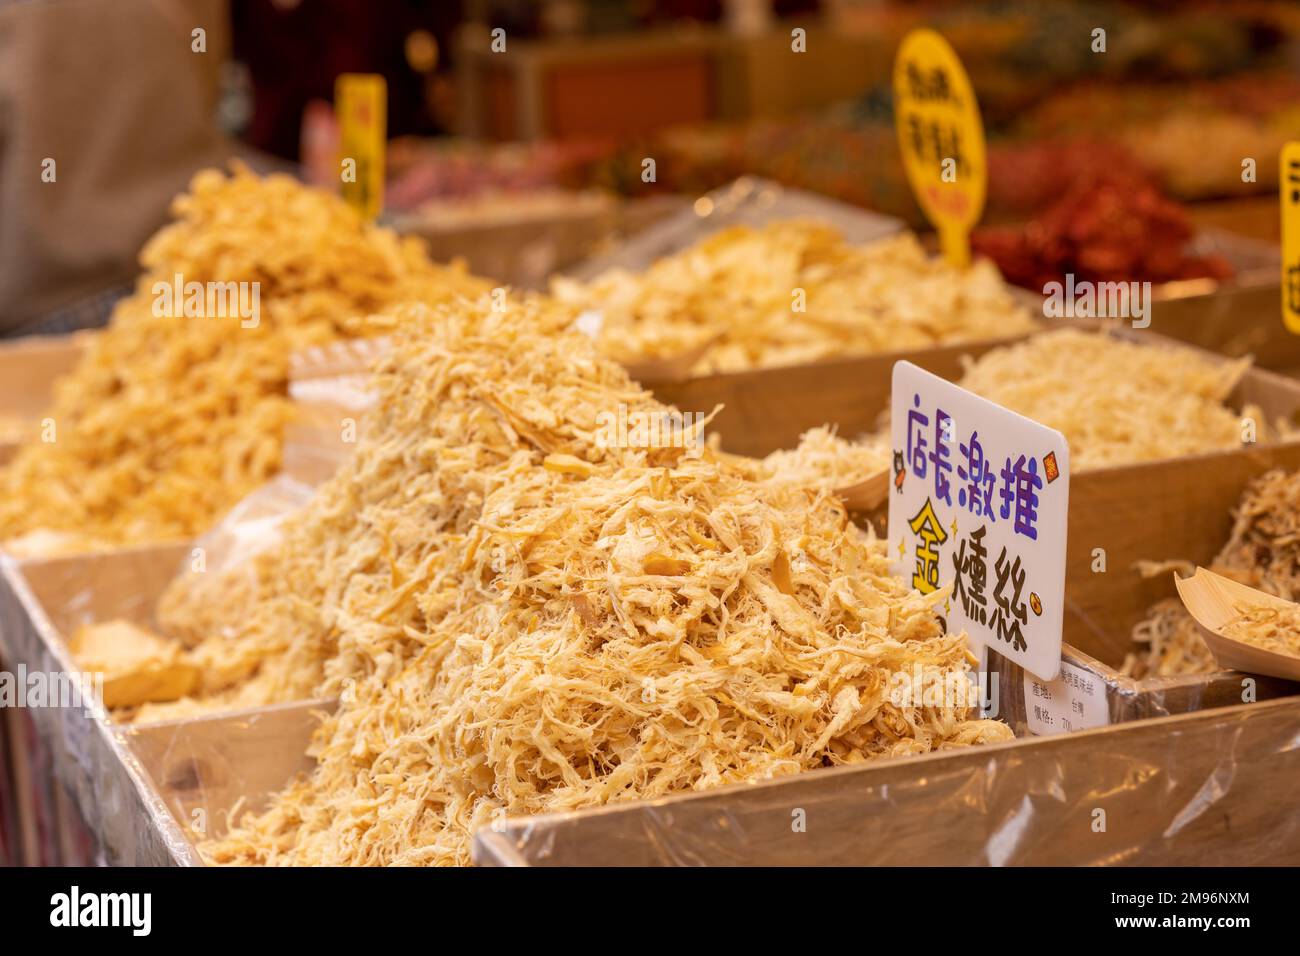 A stand selling smoked, dried shredded squid at the Dihua Street New Year's market in Taipei ahead of the Lunar New Year and the Year of the Rabbit. Stock Photo